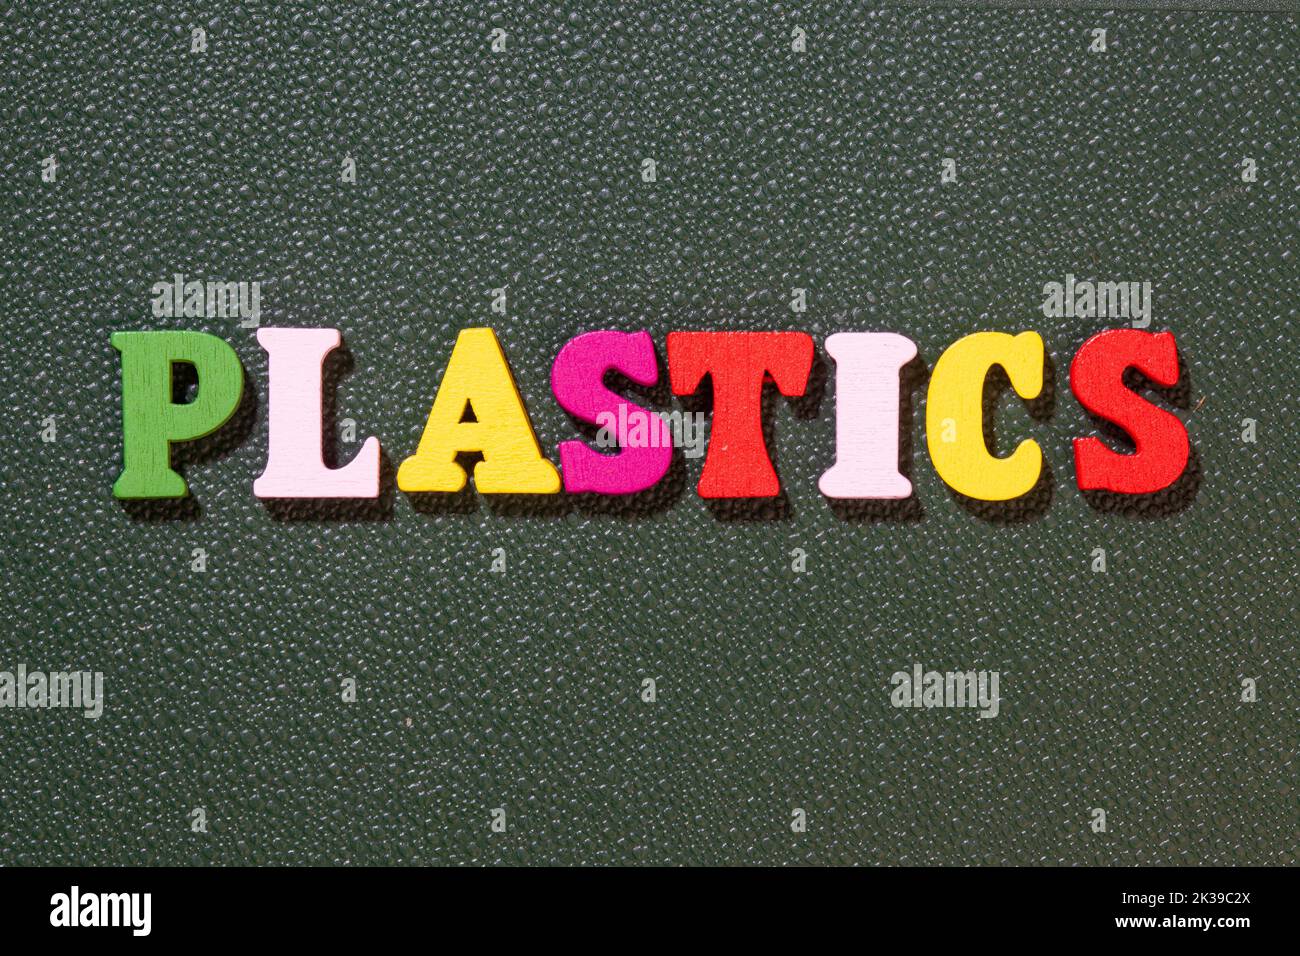 'Plastics' word - Inscription by colorful letters close up Stock Photo